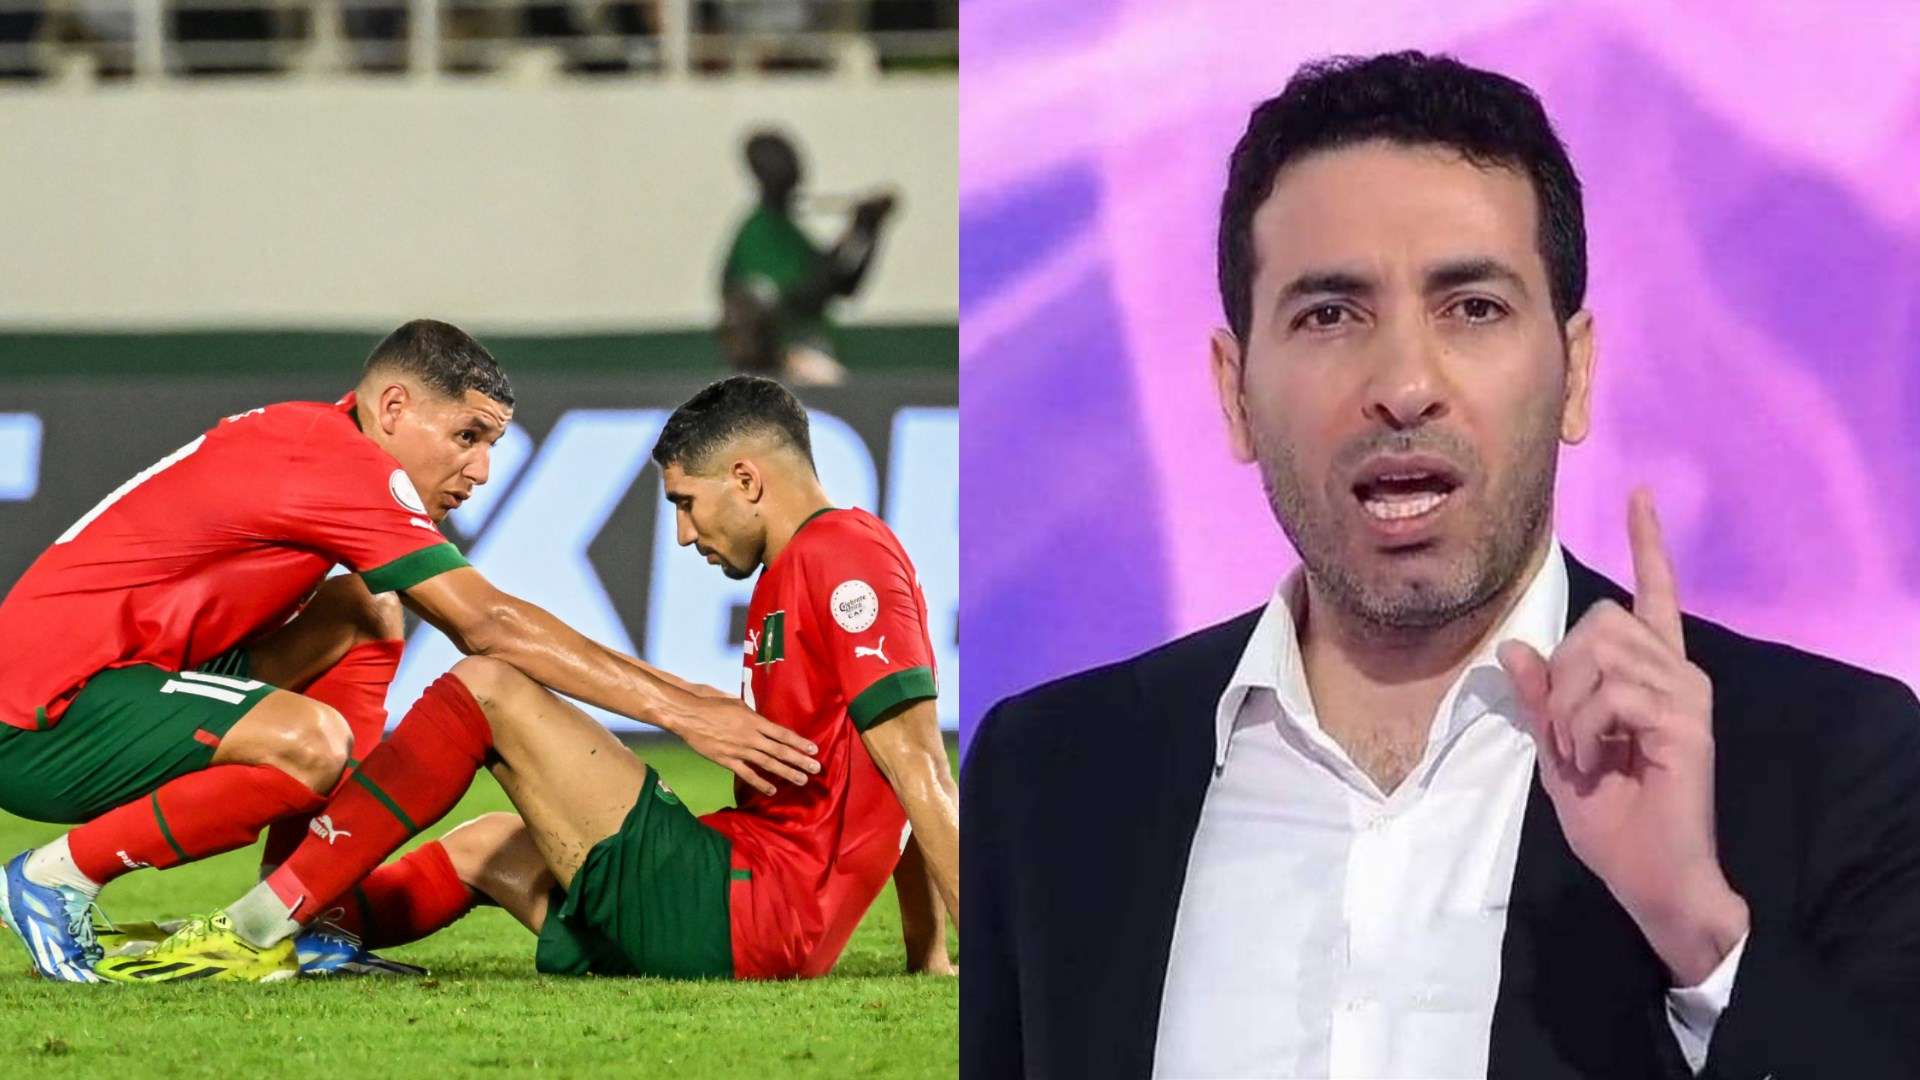 Morocco - Mohamed Aboutrika